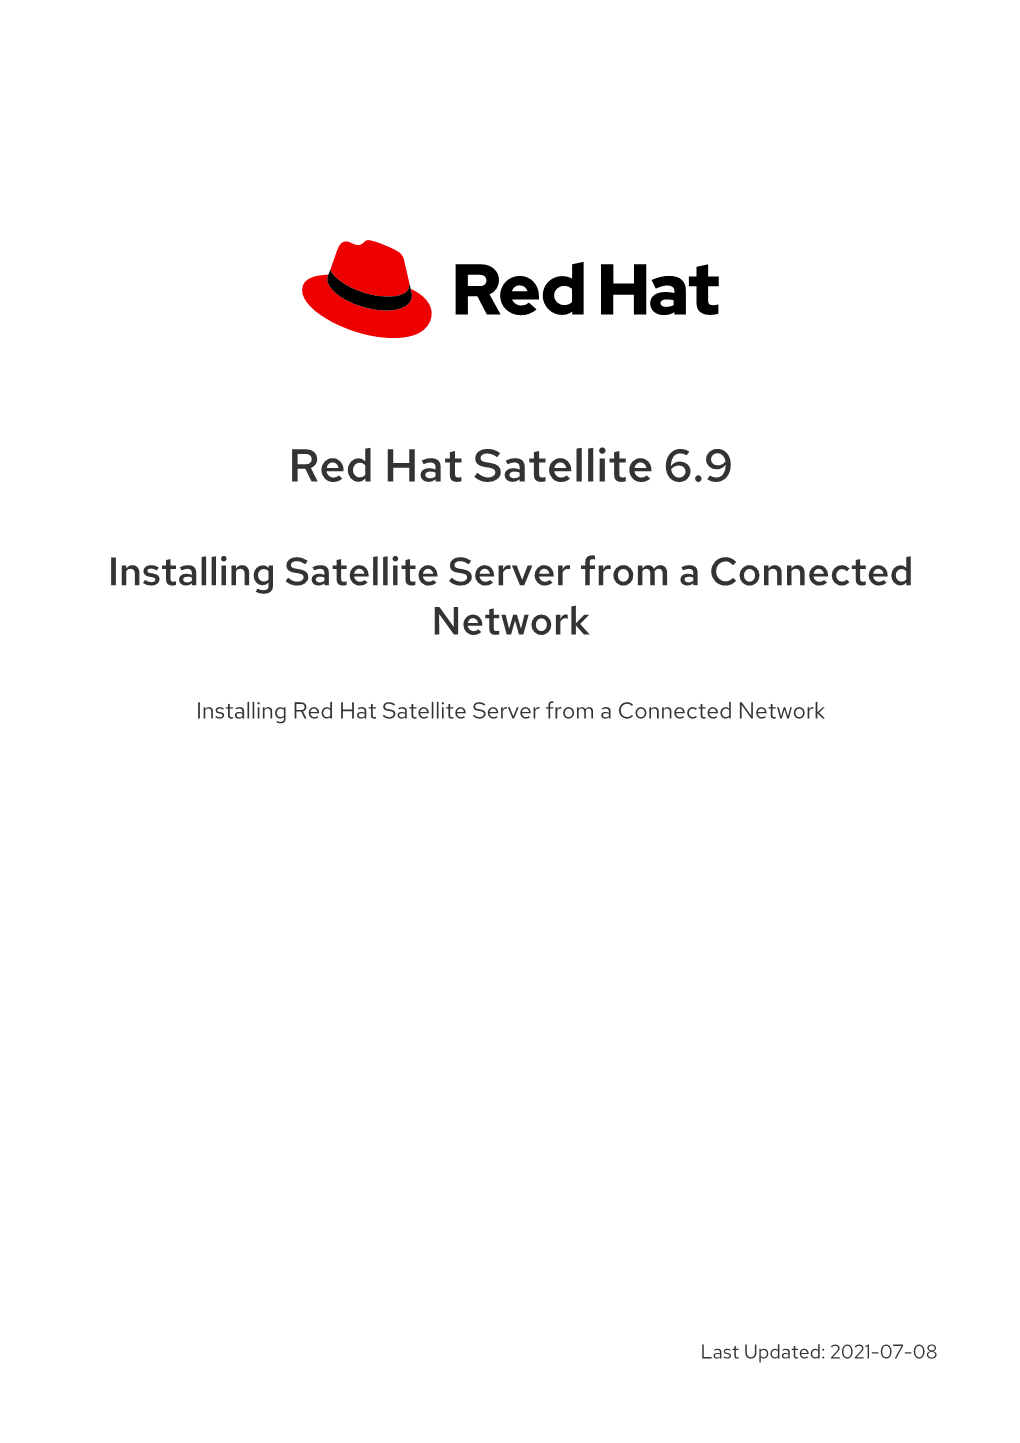 Installing Satellite Server from a Connected Network